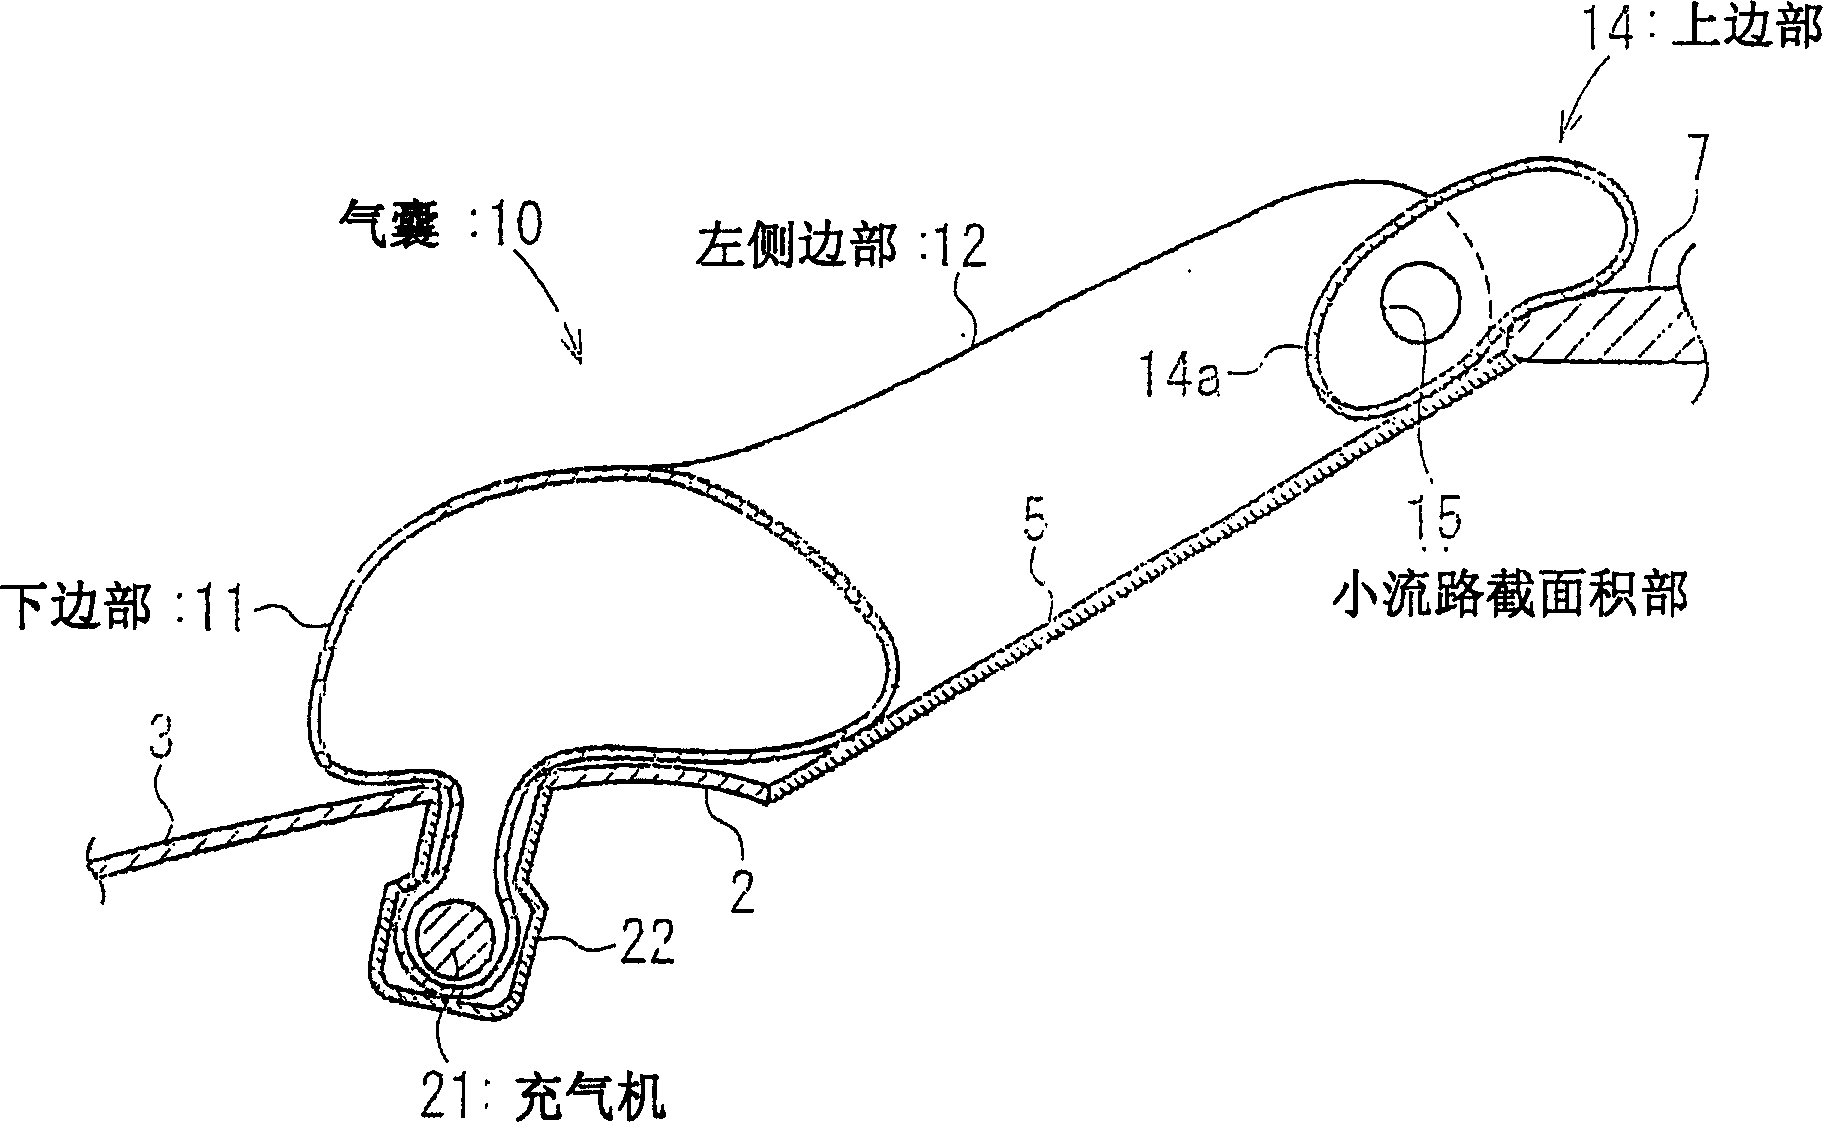 Airbag and airbag device for protecting a pedestrian or the like